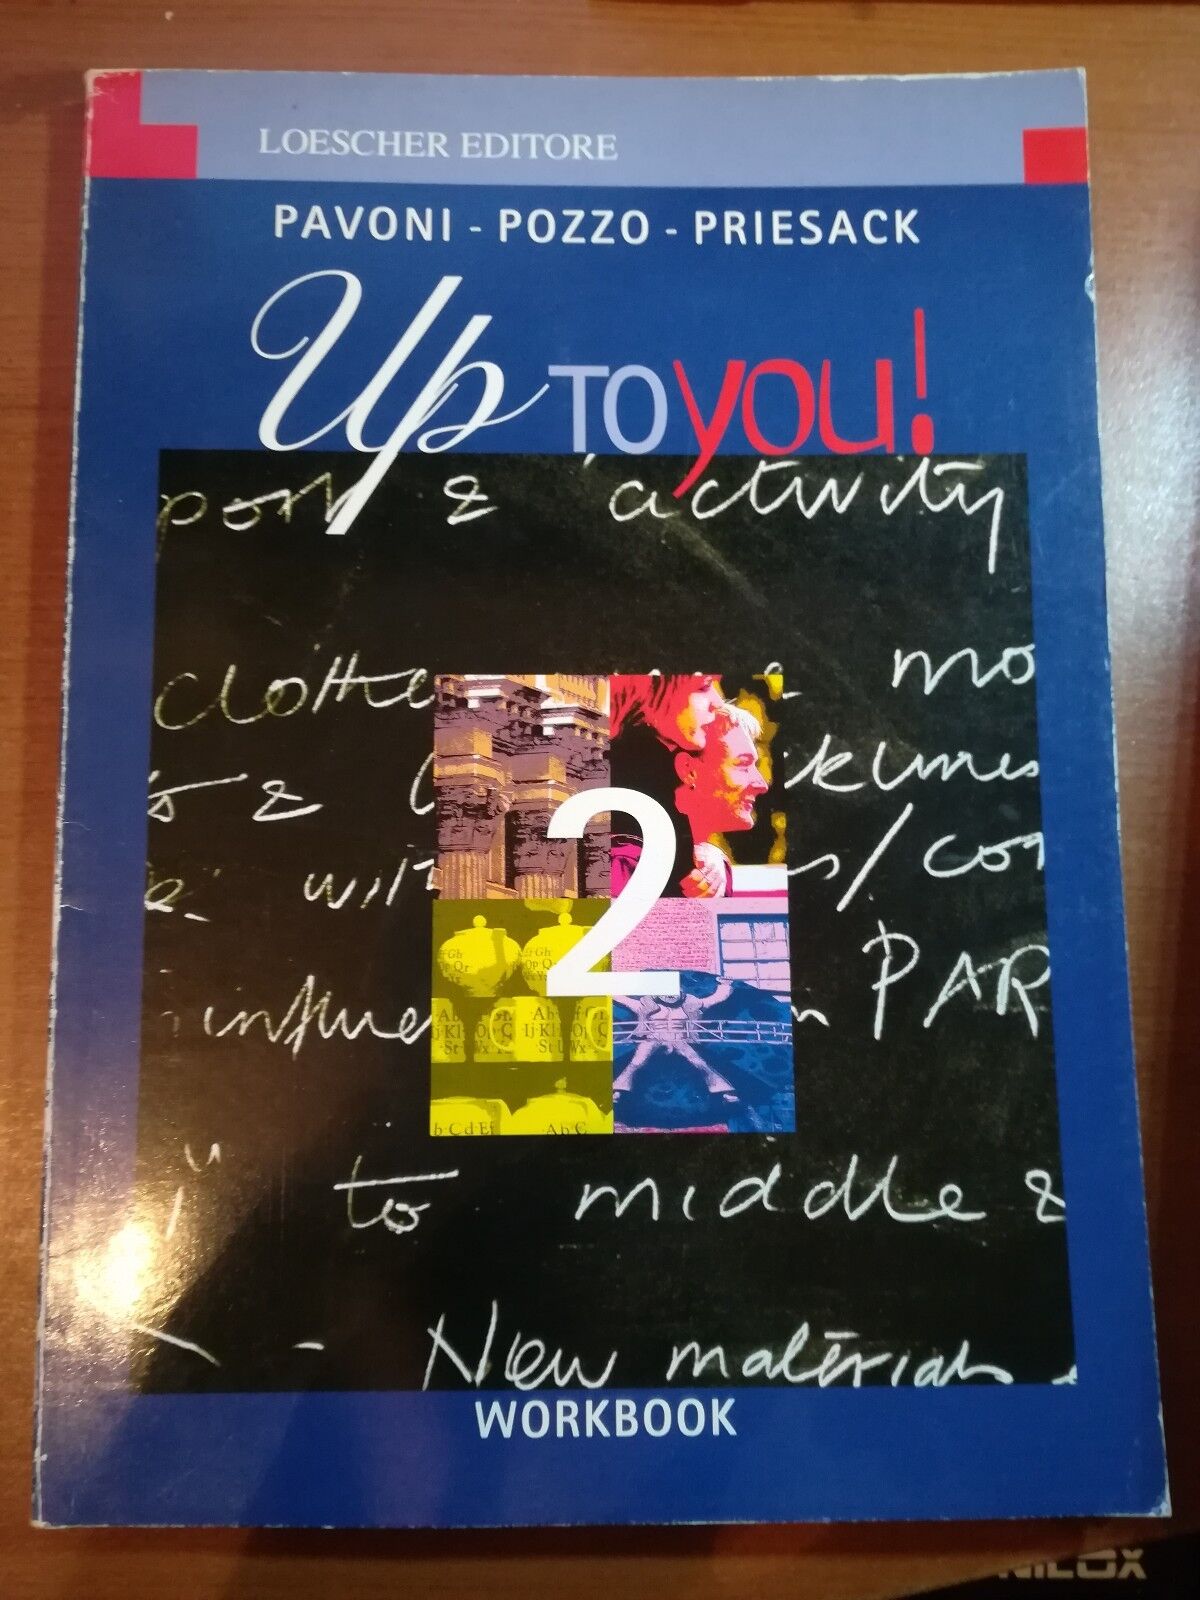 Up to you - Pavoni,Pozzo,Priesack - Loescher - 1999 - M